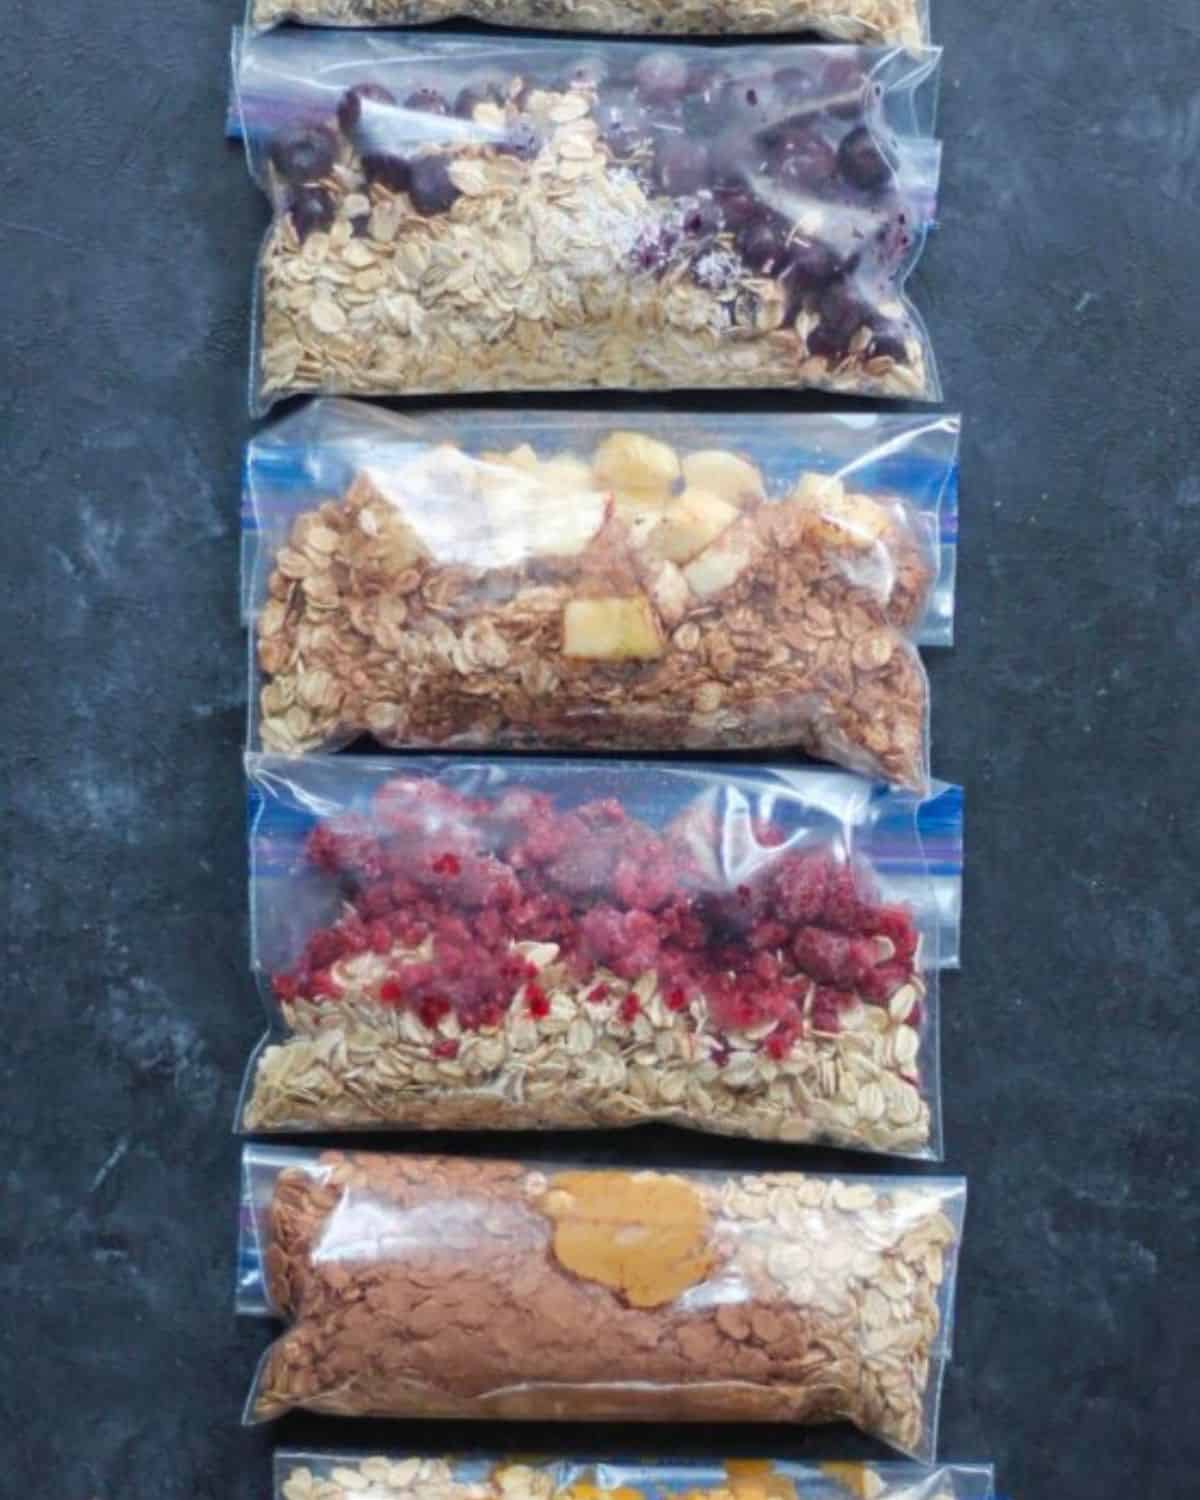 How to Make Overnight Oats - Organize Yourself Skinny